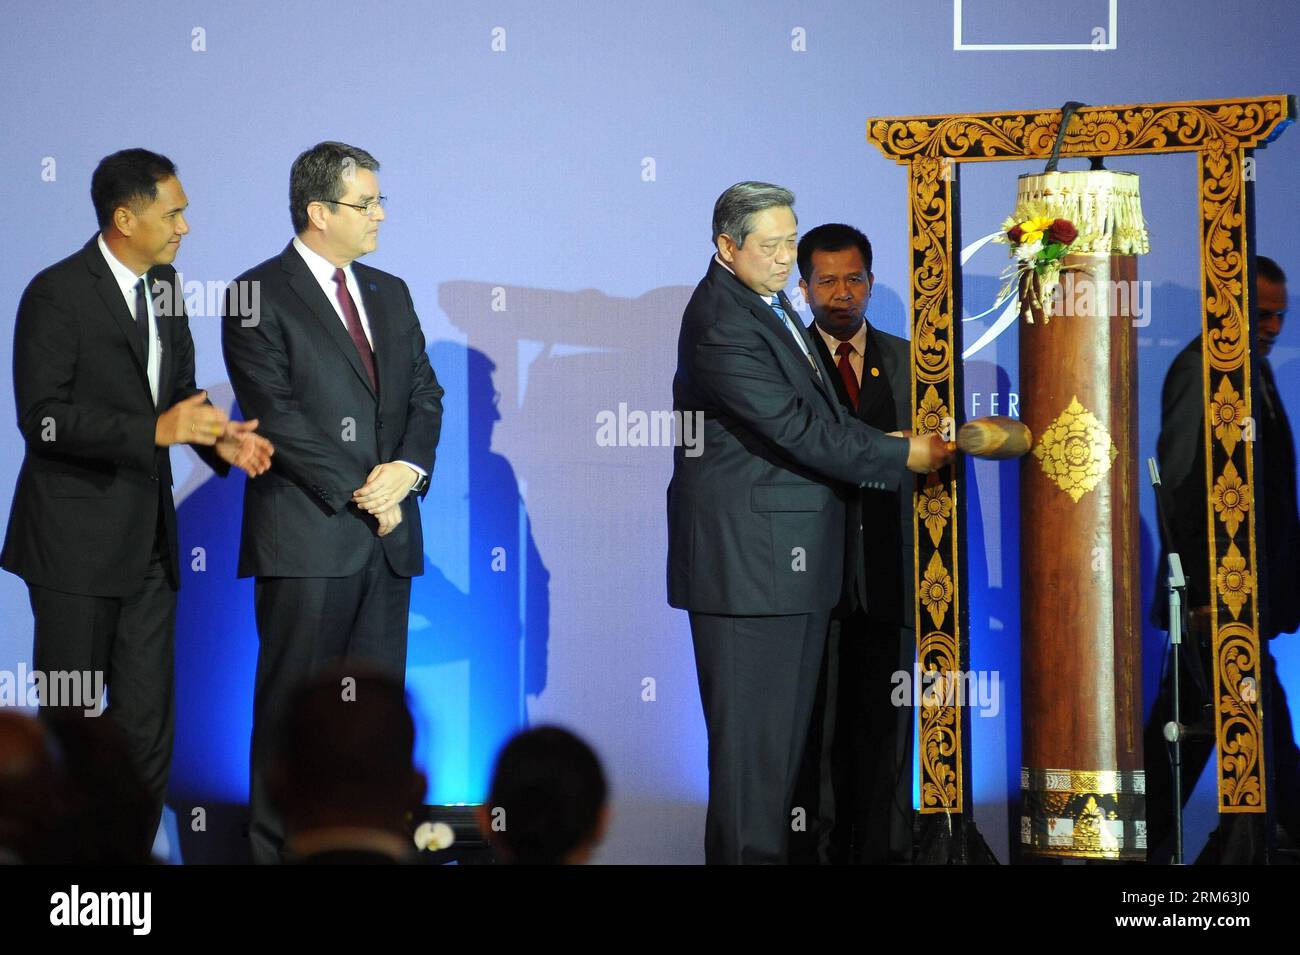 Bildnummer: 60787060  Datum: 03.12.2013  Copyright: imago/Xinhua     (131203) -- BALI, Dec. 3, 2013 (Xinhua) -- Indonesian President Susilo Bambang Yudhoyono hits the kulkul, a balinese traditional drum, to open the ninth ministerial conference of the World Trade Organization (WTO) in Bali, Indonesia, Dec. 3, 2013. The four-day-long ninth ministerial conference of the World Trade Organization (WTO), or the MC9, was opened here Tuesday afternoon in the Indonesian resort island of Bali, struggling to revive the long-stalled Doha Round by reaching a possible trade deal. (Xinhua/Veri Sanovri) INDO Stock Photo